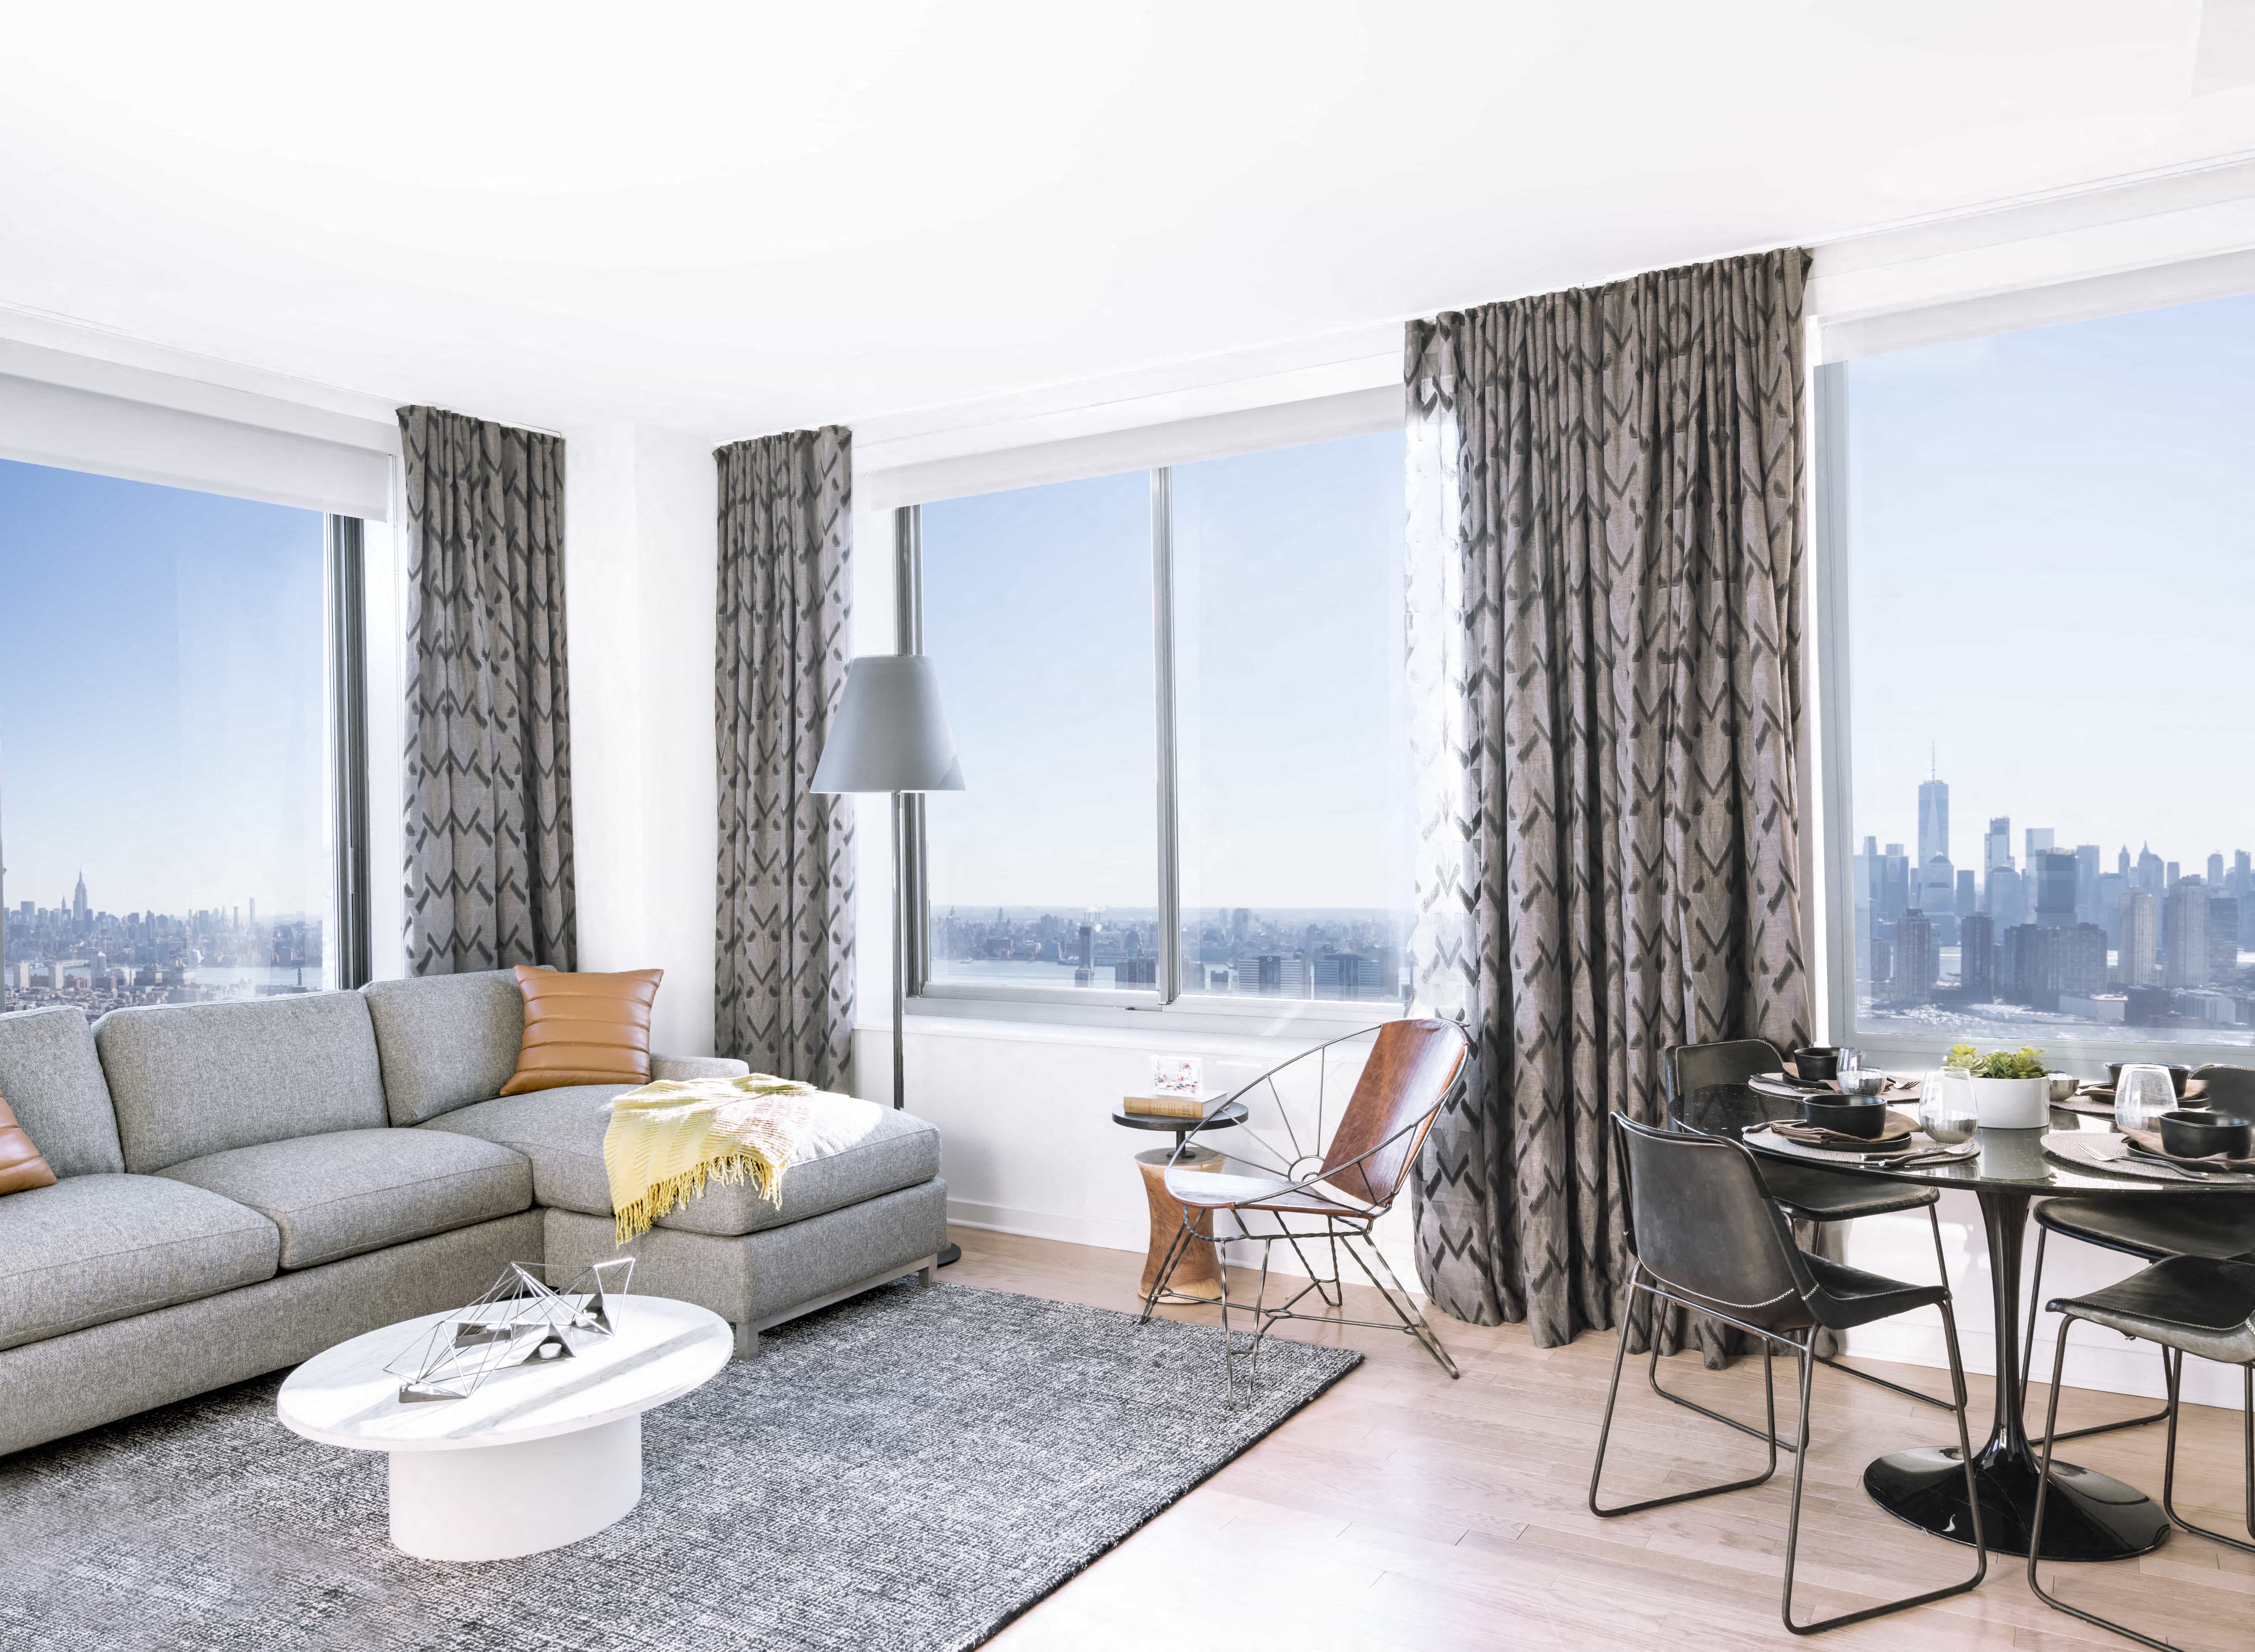 Best Cheap Apartments in Jersey City, NJ: from $816 | RENTCafé